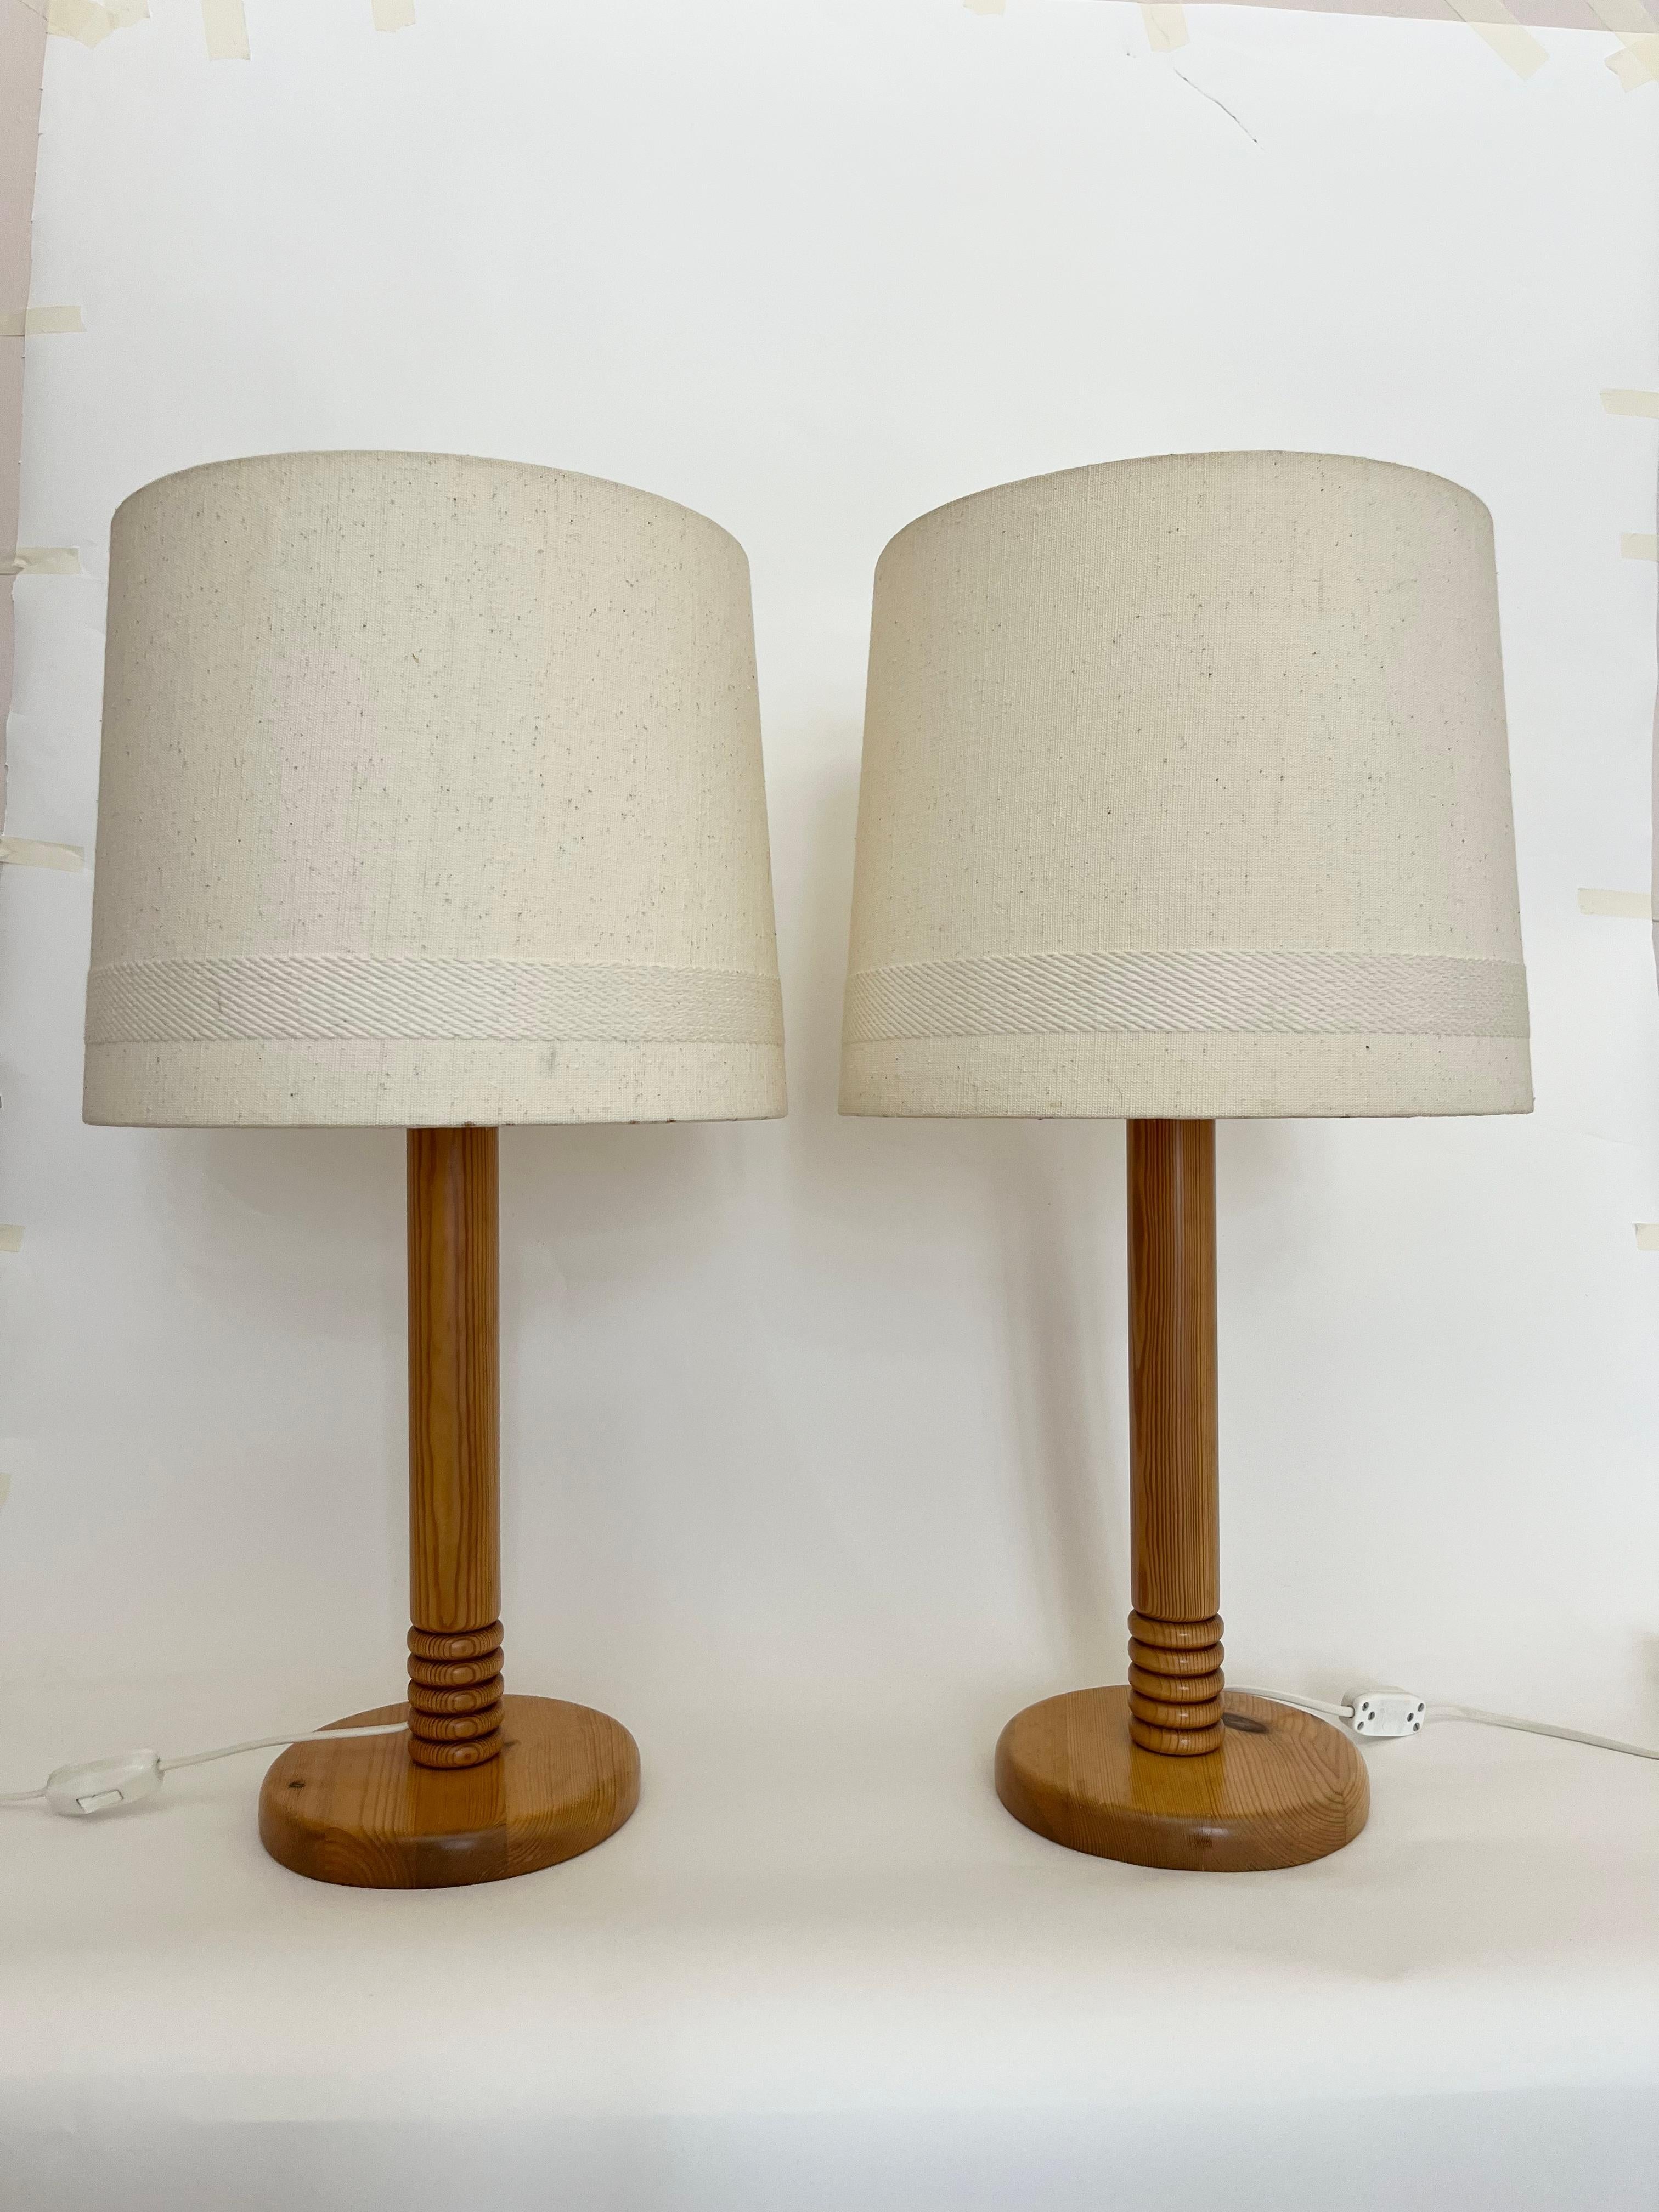 Tall and understated impressive, this pair of Danish wooden table lamps were made in the 1970s. Comes with the original shades in light ivory nuance with woven decorations/details. 

Height: 66 cm (26.0 in) with the shade // Height: 43 cm (16.9 in)